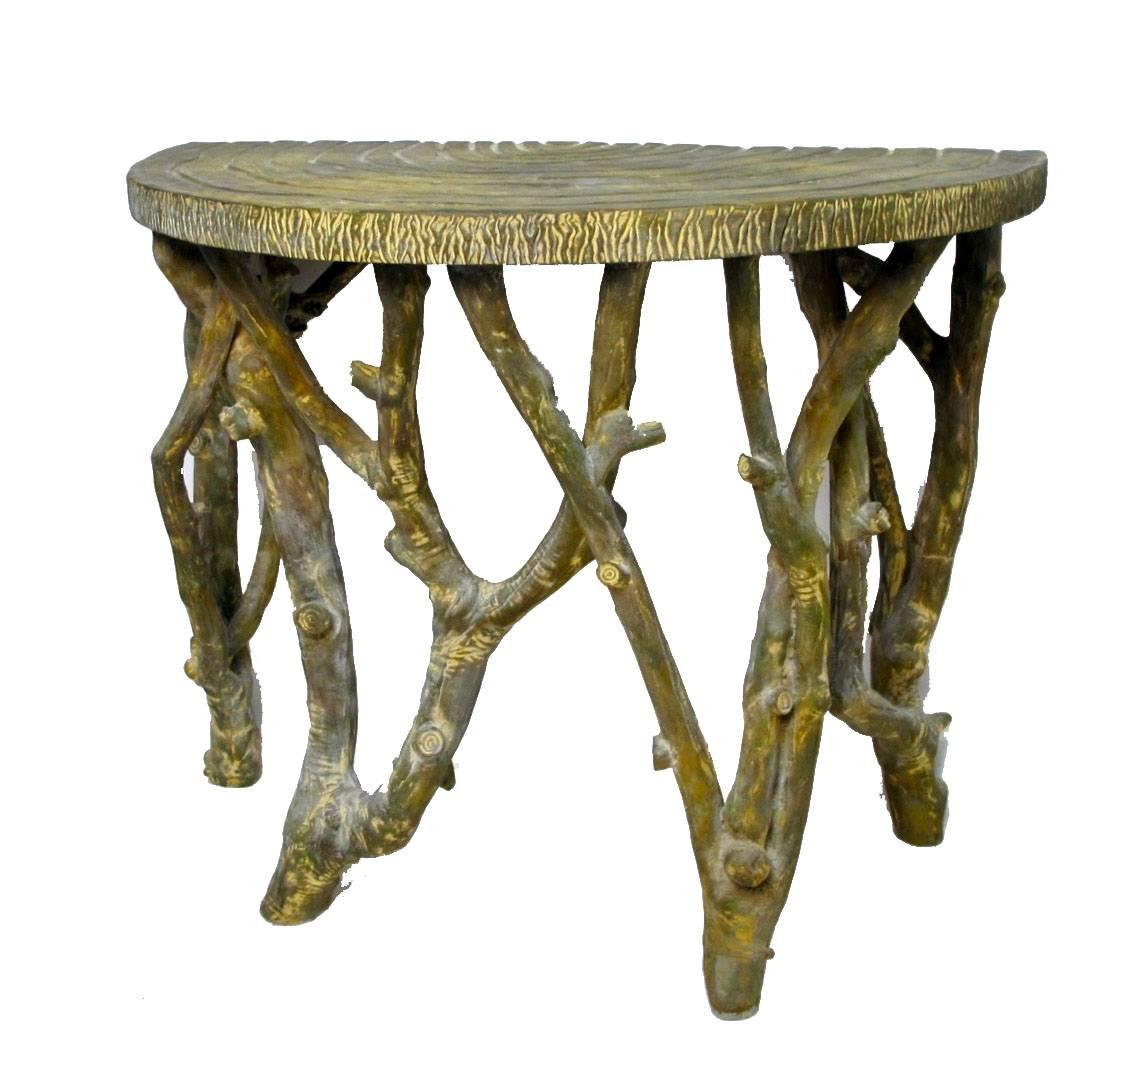 Originally purchased from Gumps in the 1970s. High end designer faux bois tree branch demilune style table, cast from composition material. America, mid-20th century.